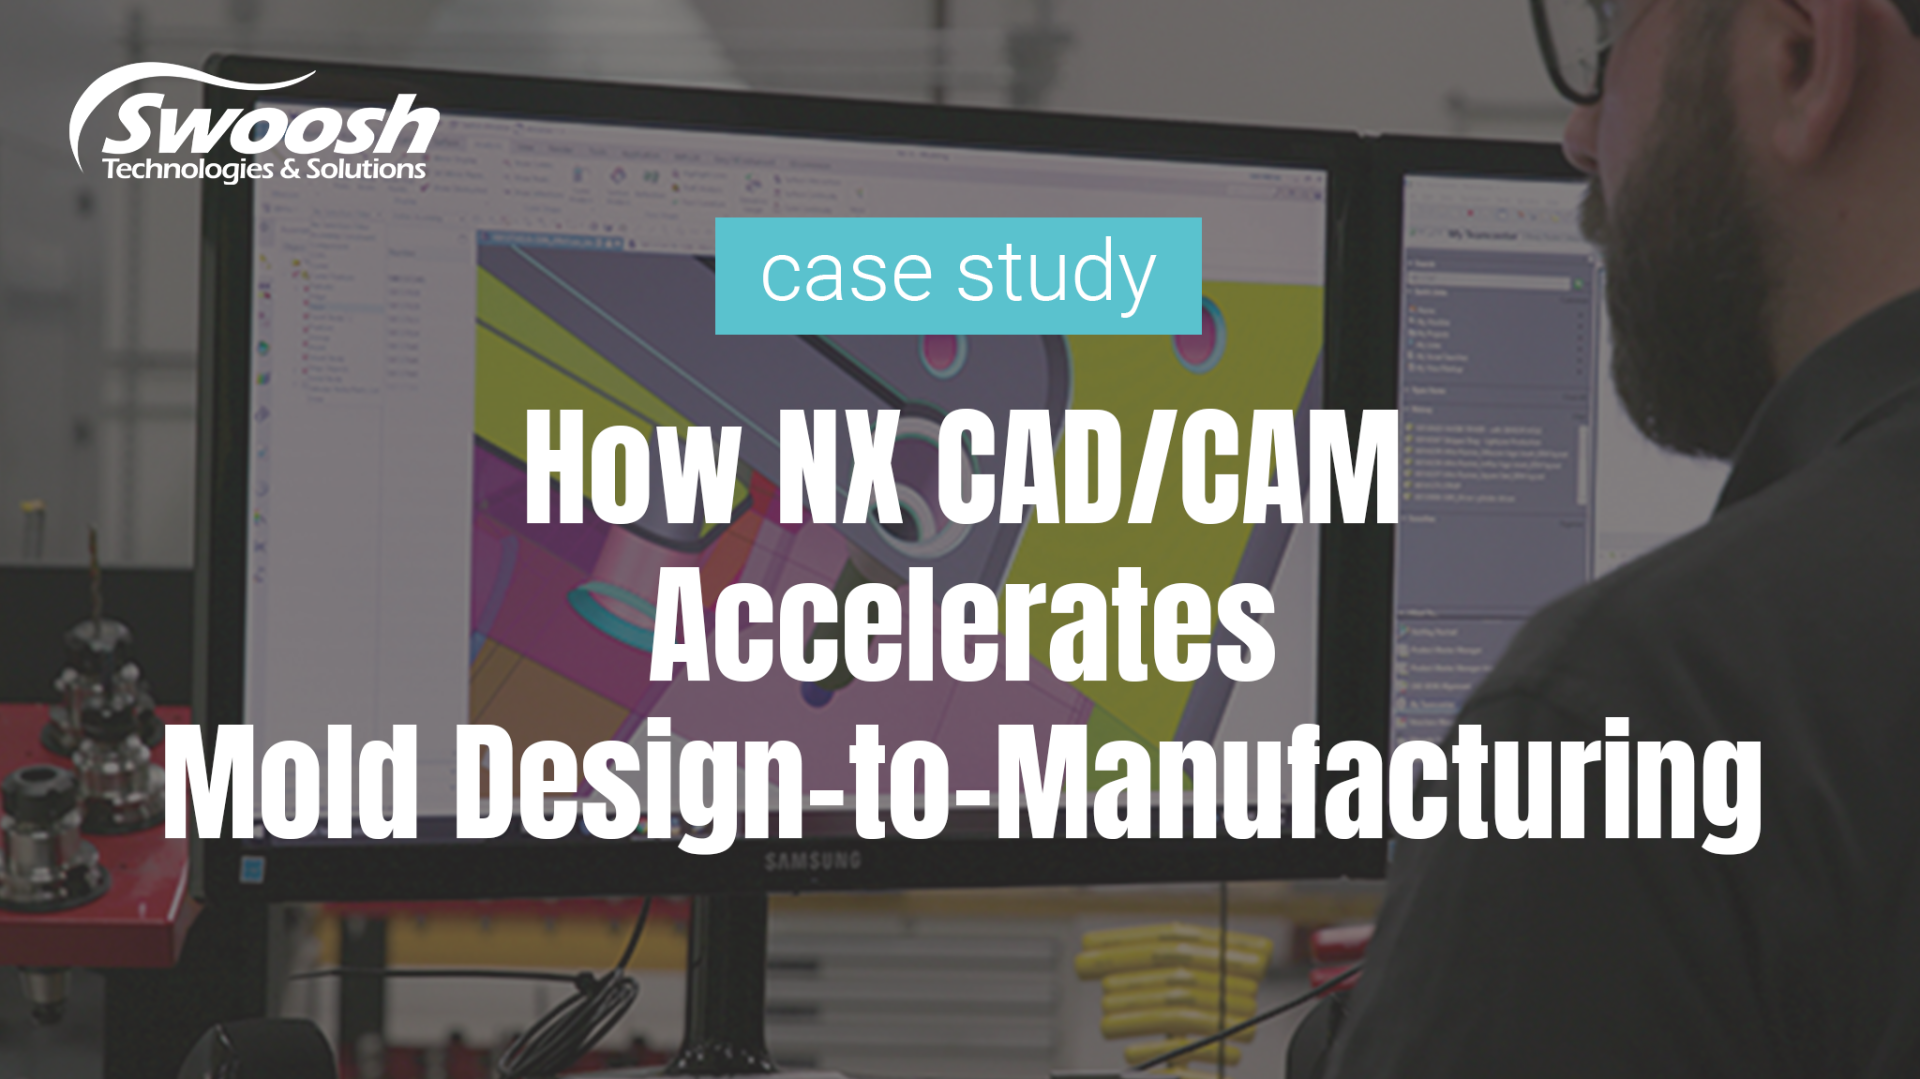 Case Study: How NX helps iMFLUX accelerate Mold Design-to-Manufacturing